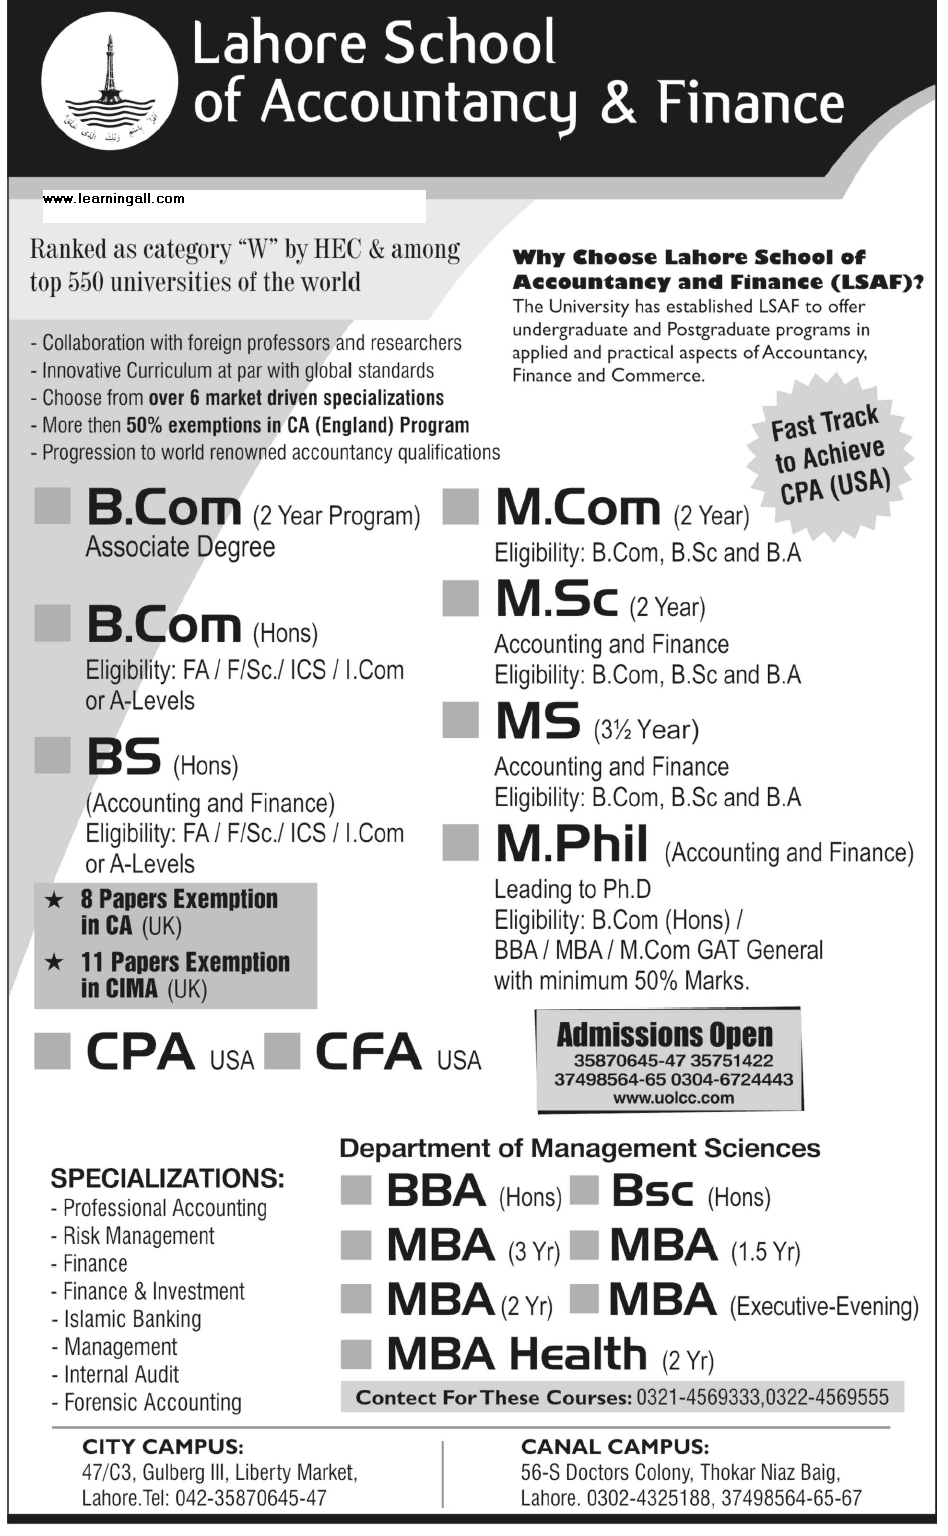 Lahore School of Accountancy & Finance Admissions